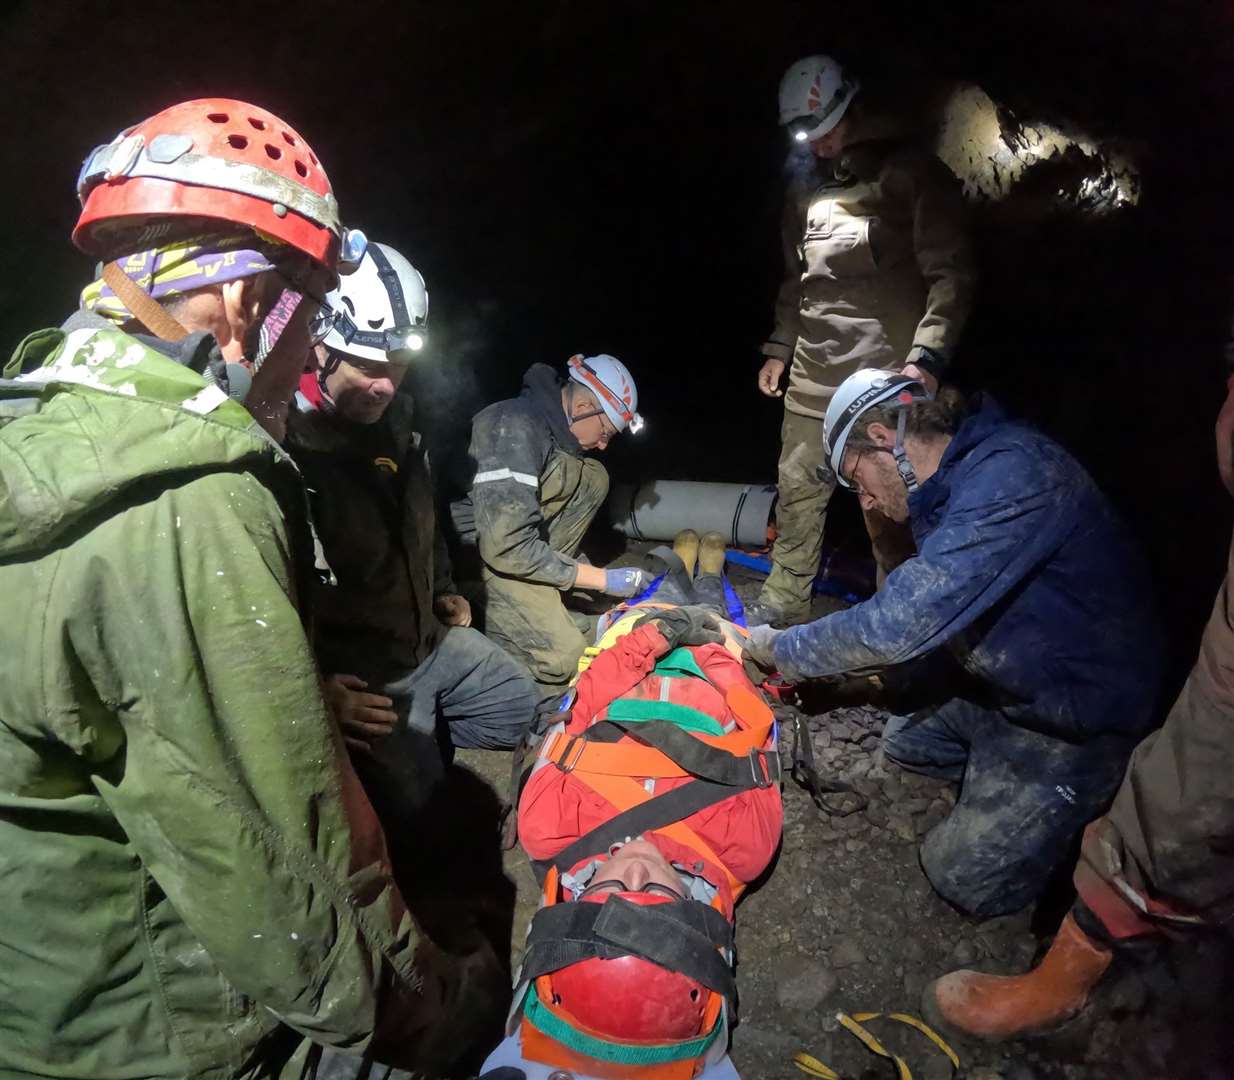 In the event of an emergency underground, Assynt MRT would support Scottish Cave Rescue Organisation in above and below ground rescue management.